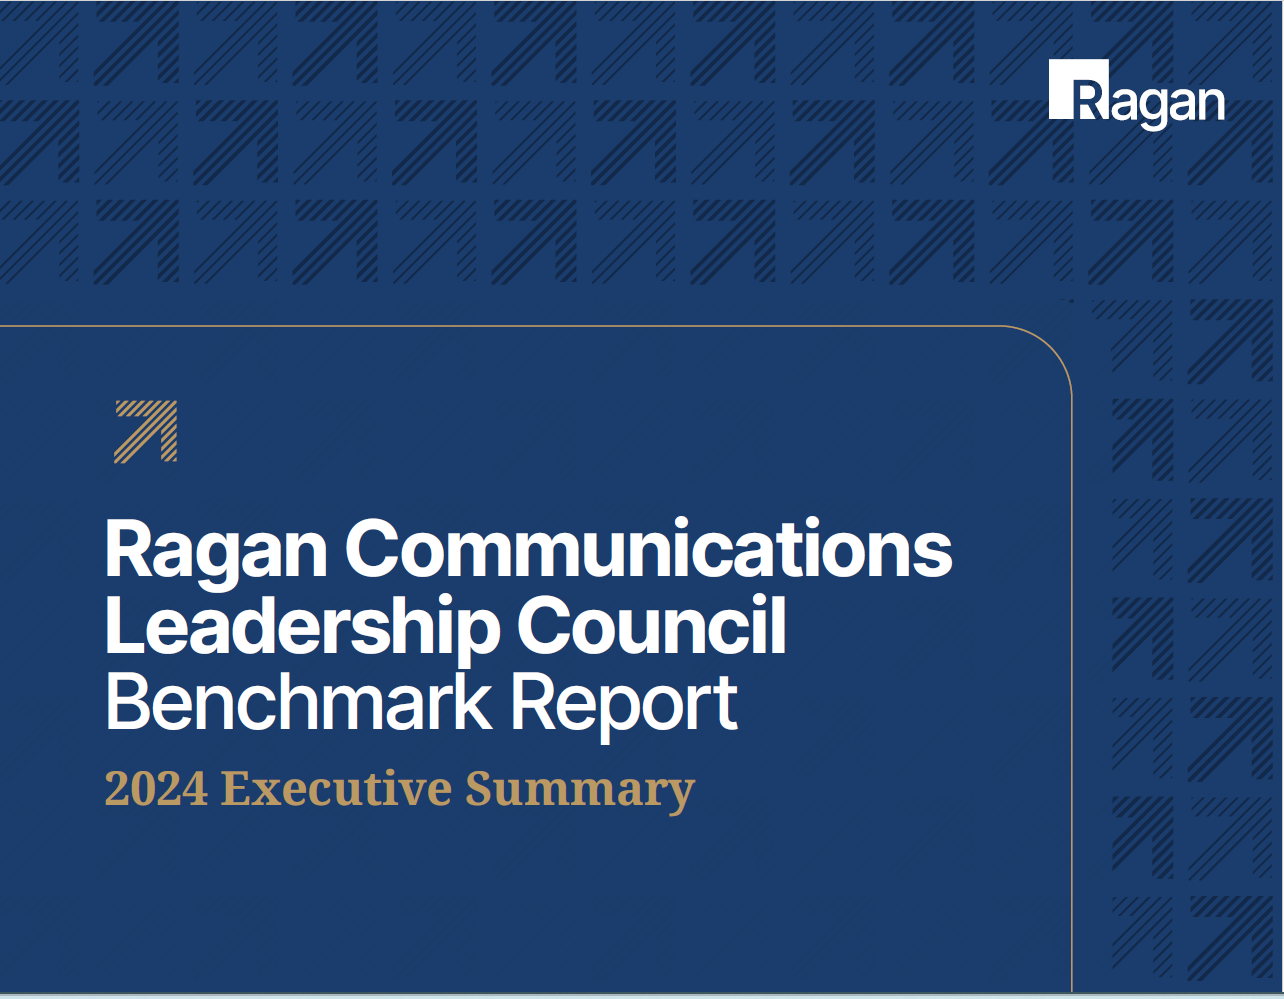 Read the executive summary from Ragan’s 2024 Communications Benchmark Report - Ragan Communications